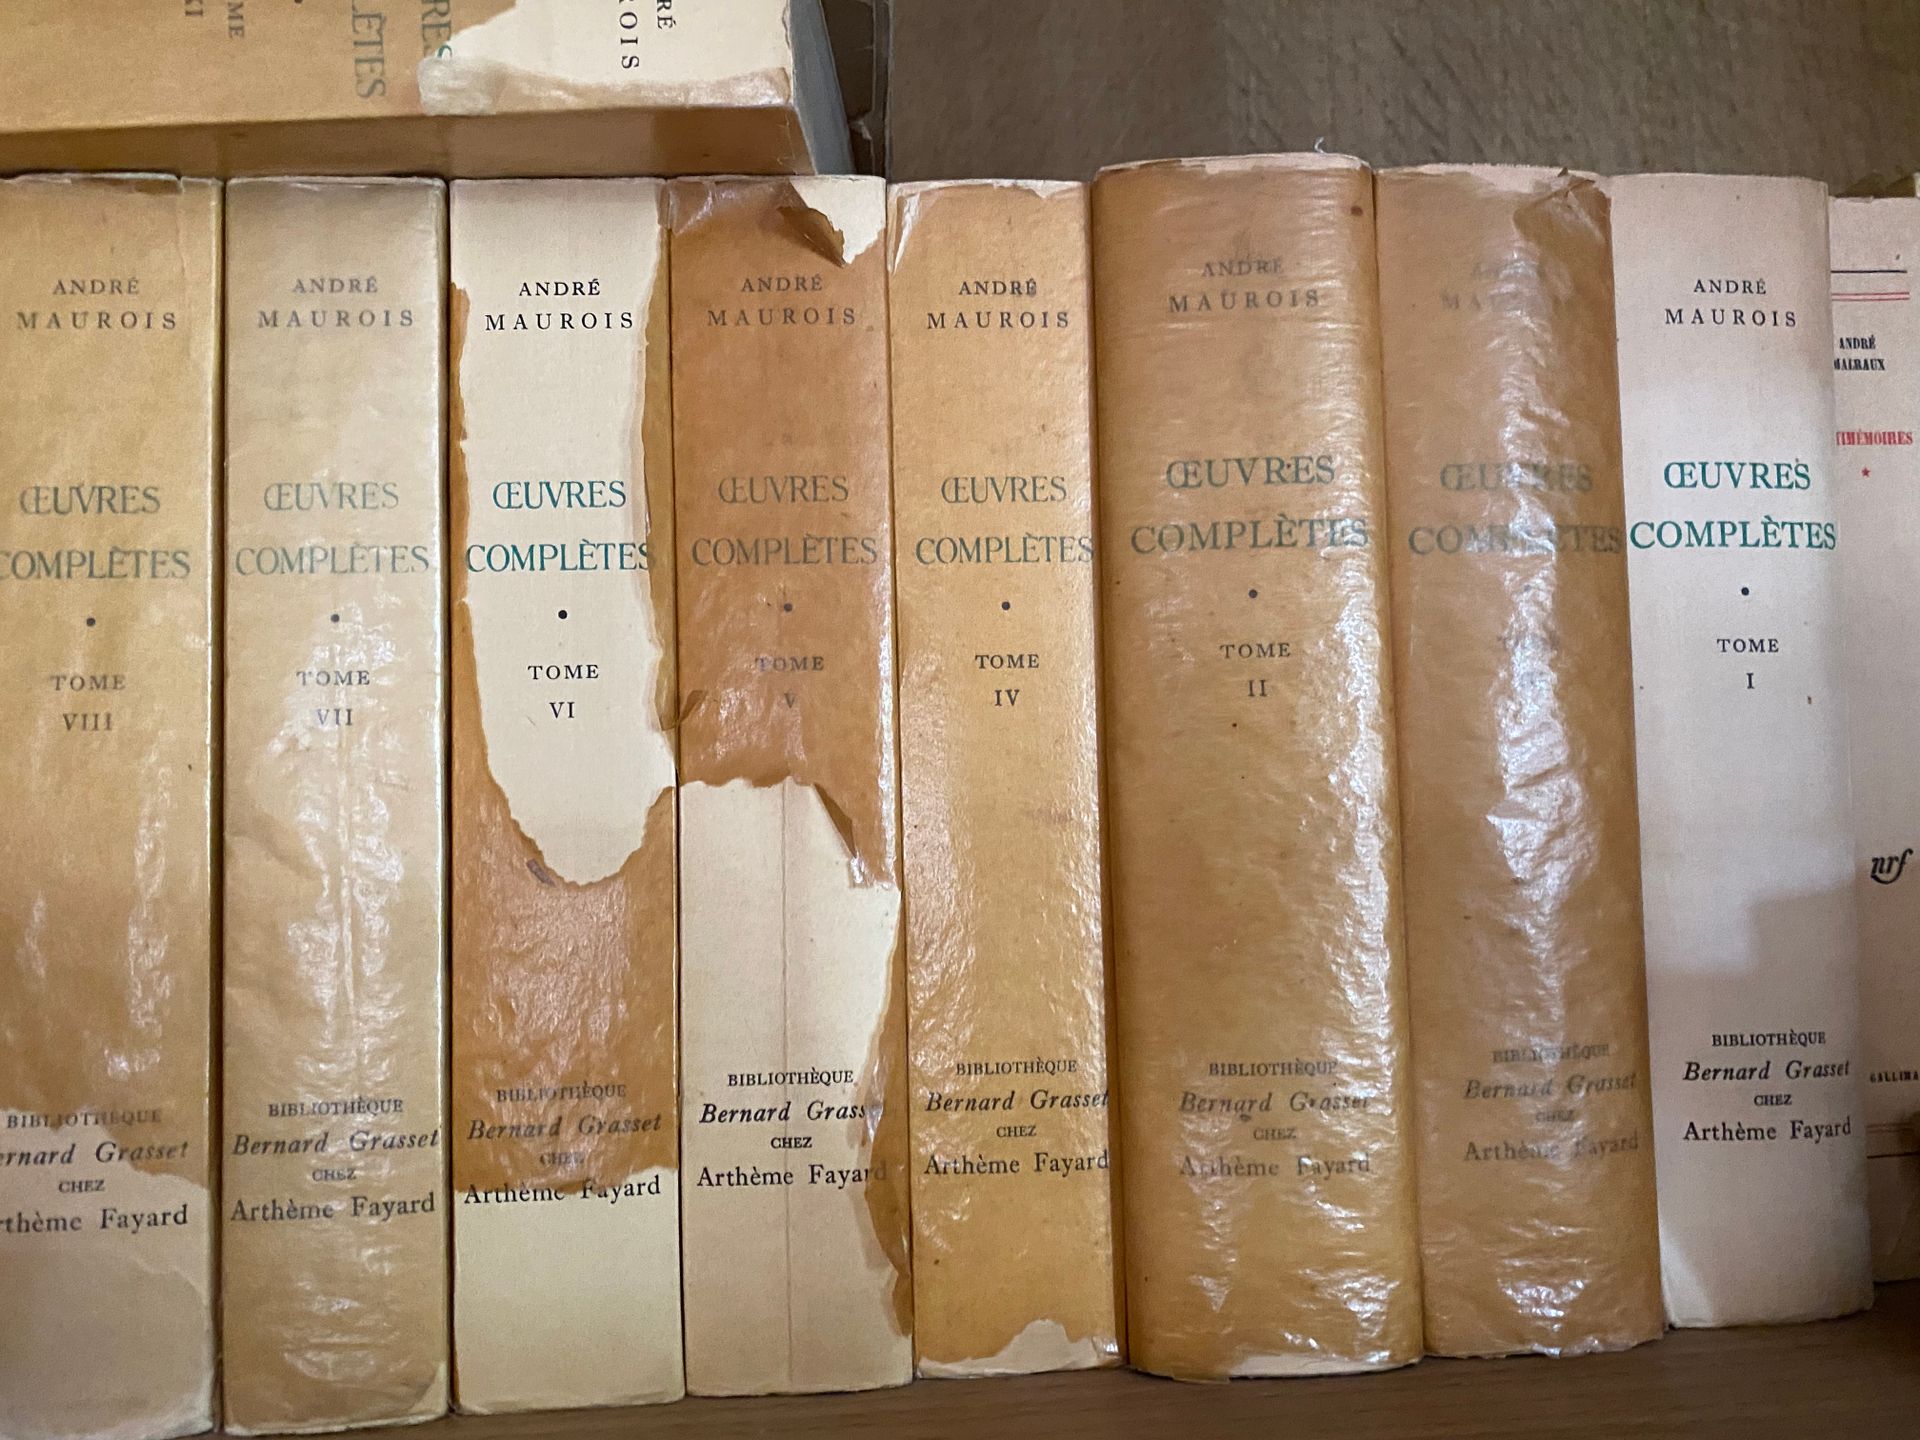 Null LOT OF BOOKS including André Maurois (Complete works).